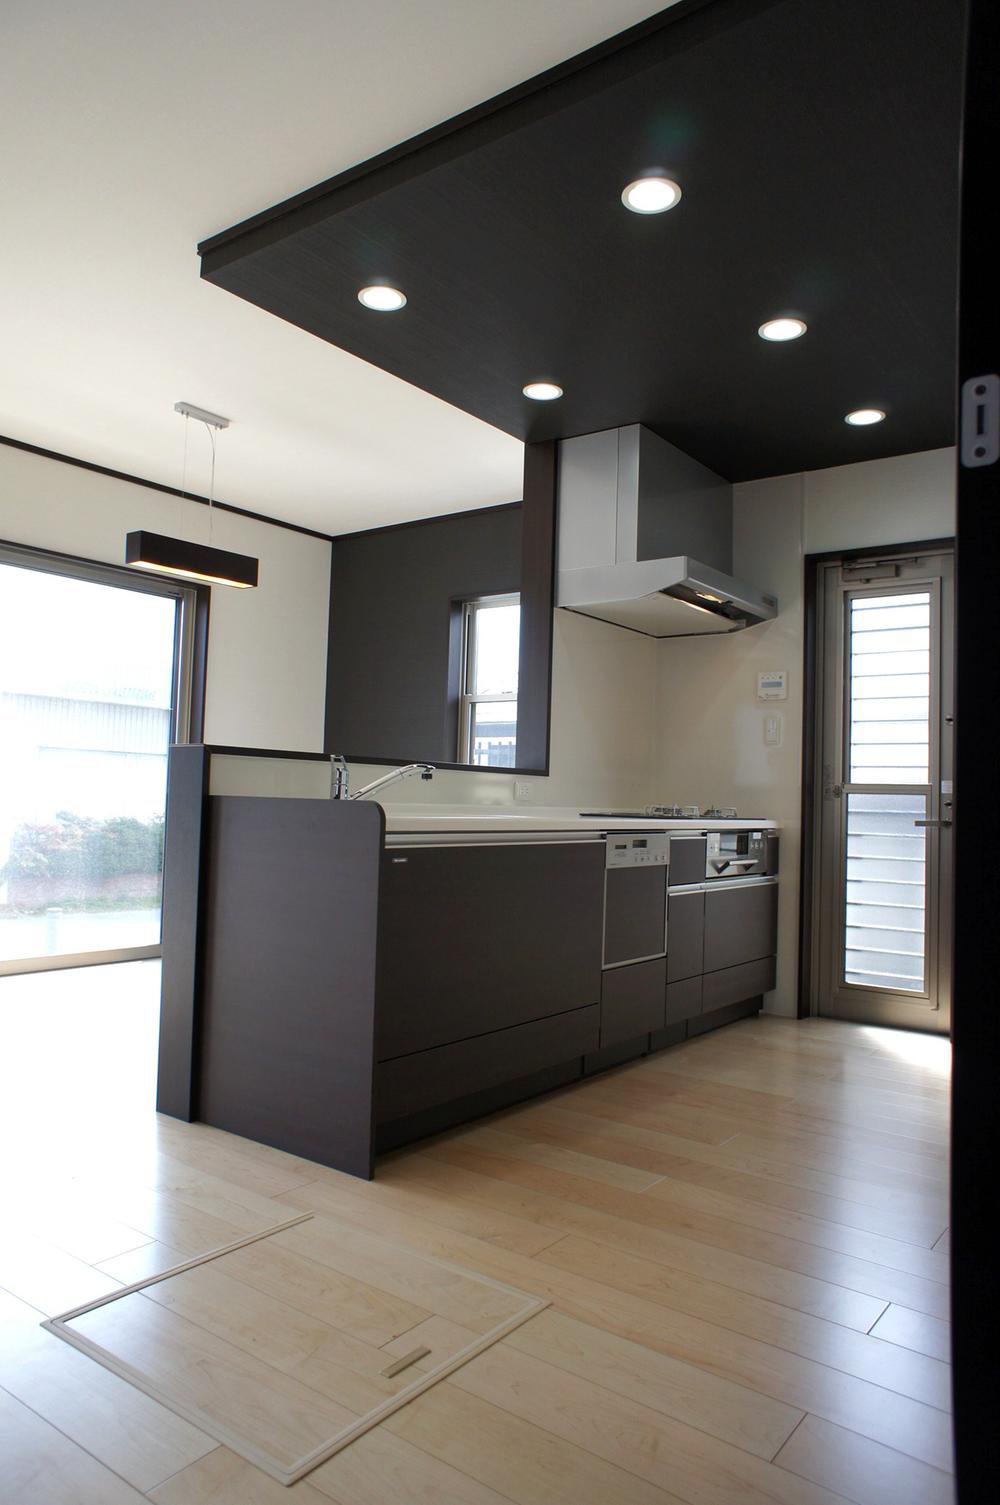 Same specifications photo (kitchen). You can choose from the door color 45 colors. 